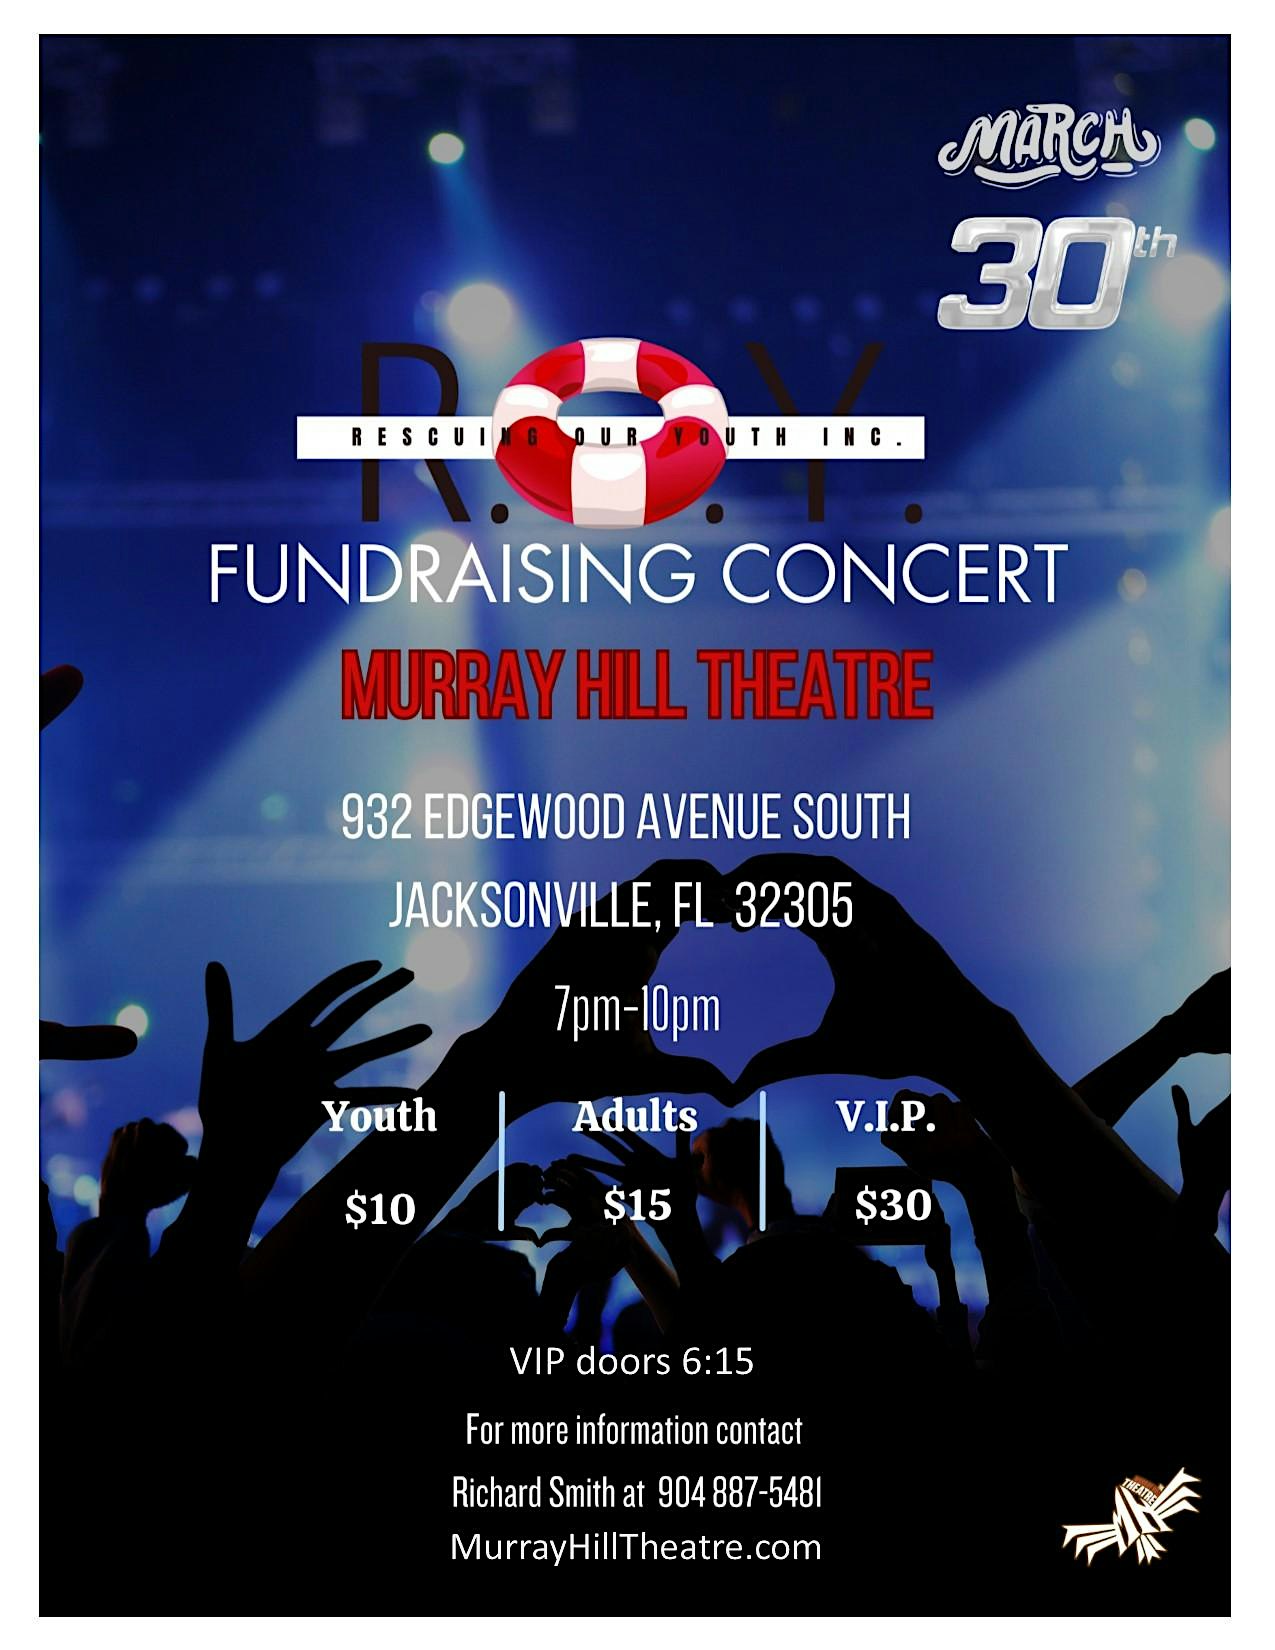 Rescuing Our Youth Fundraising Concert